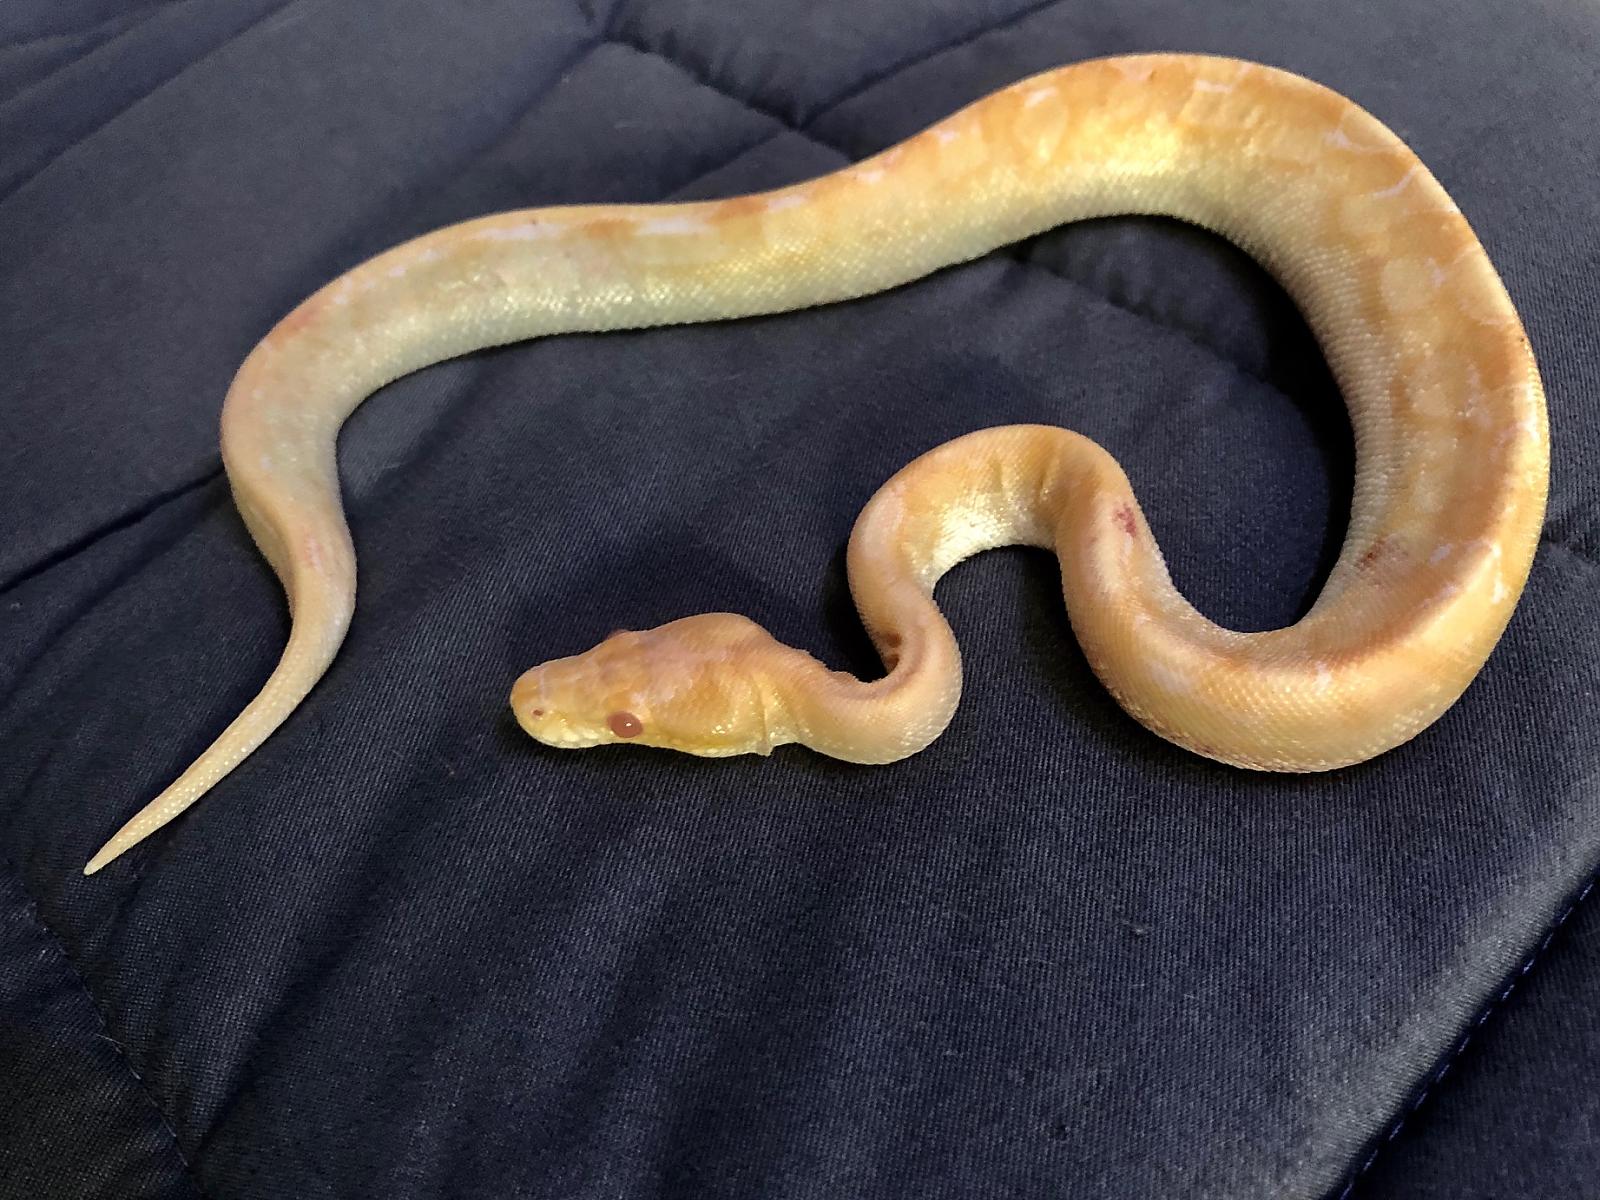 Danger Noodle now, during his illness/Septicemia?